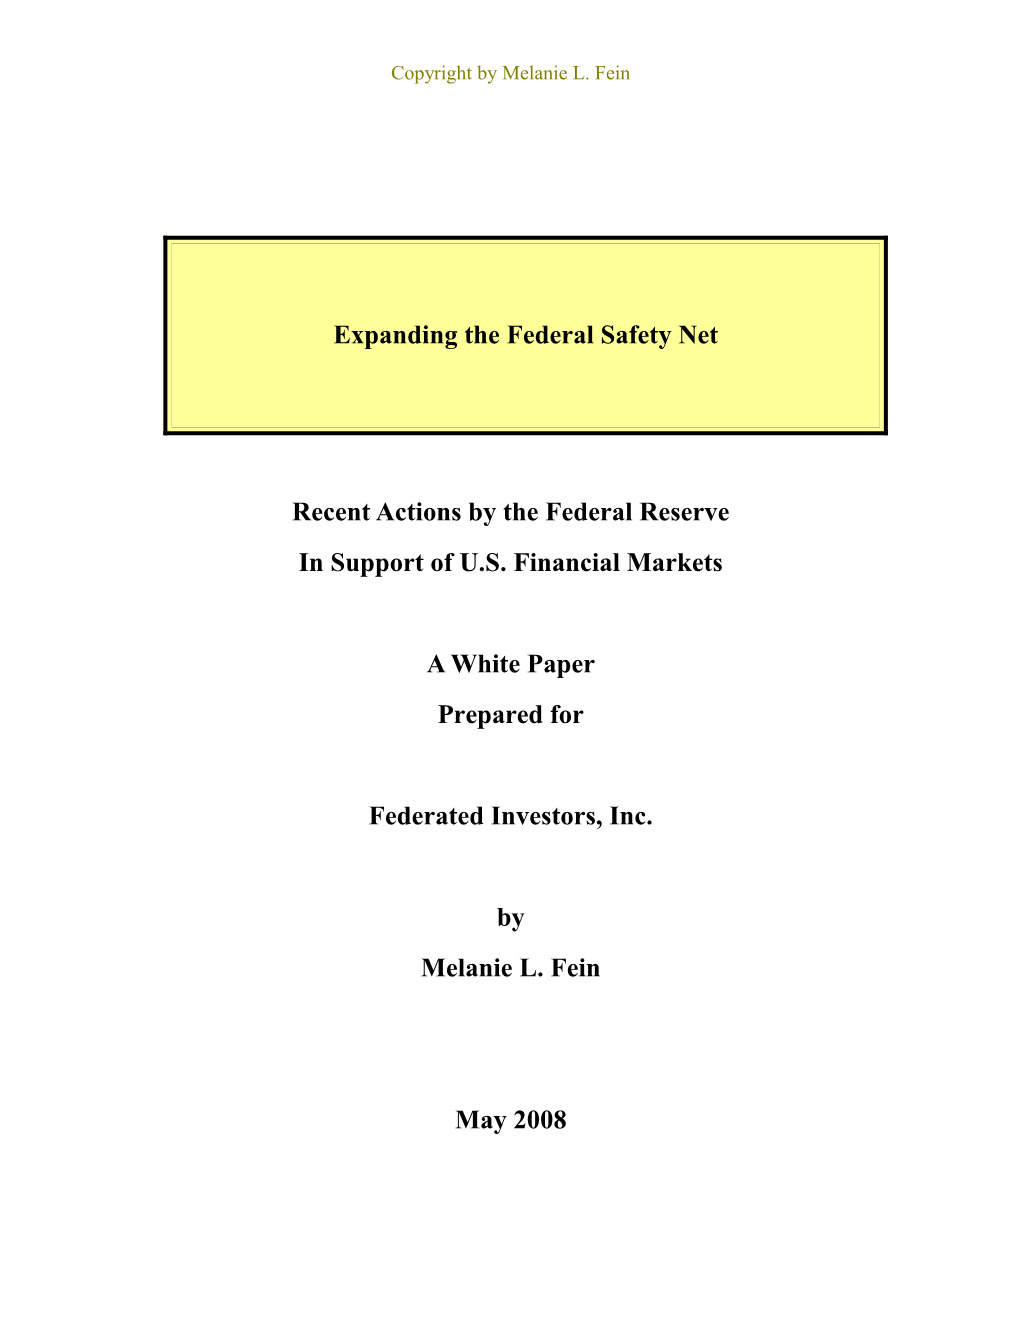 You Asked Me to Summarize the Recent Actions by the Federal Reserve Board ( Federal Reserve